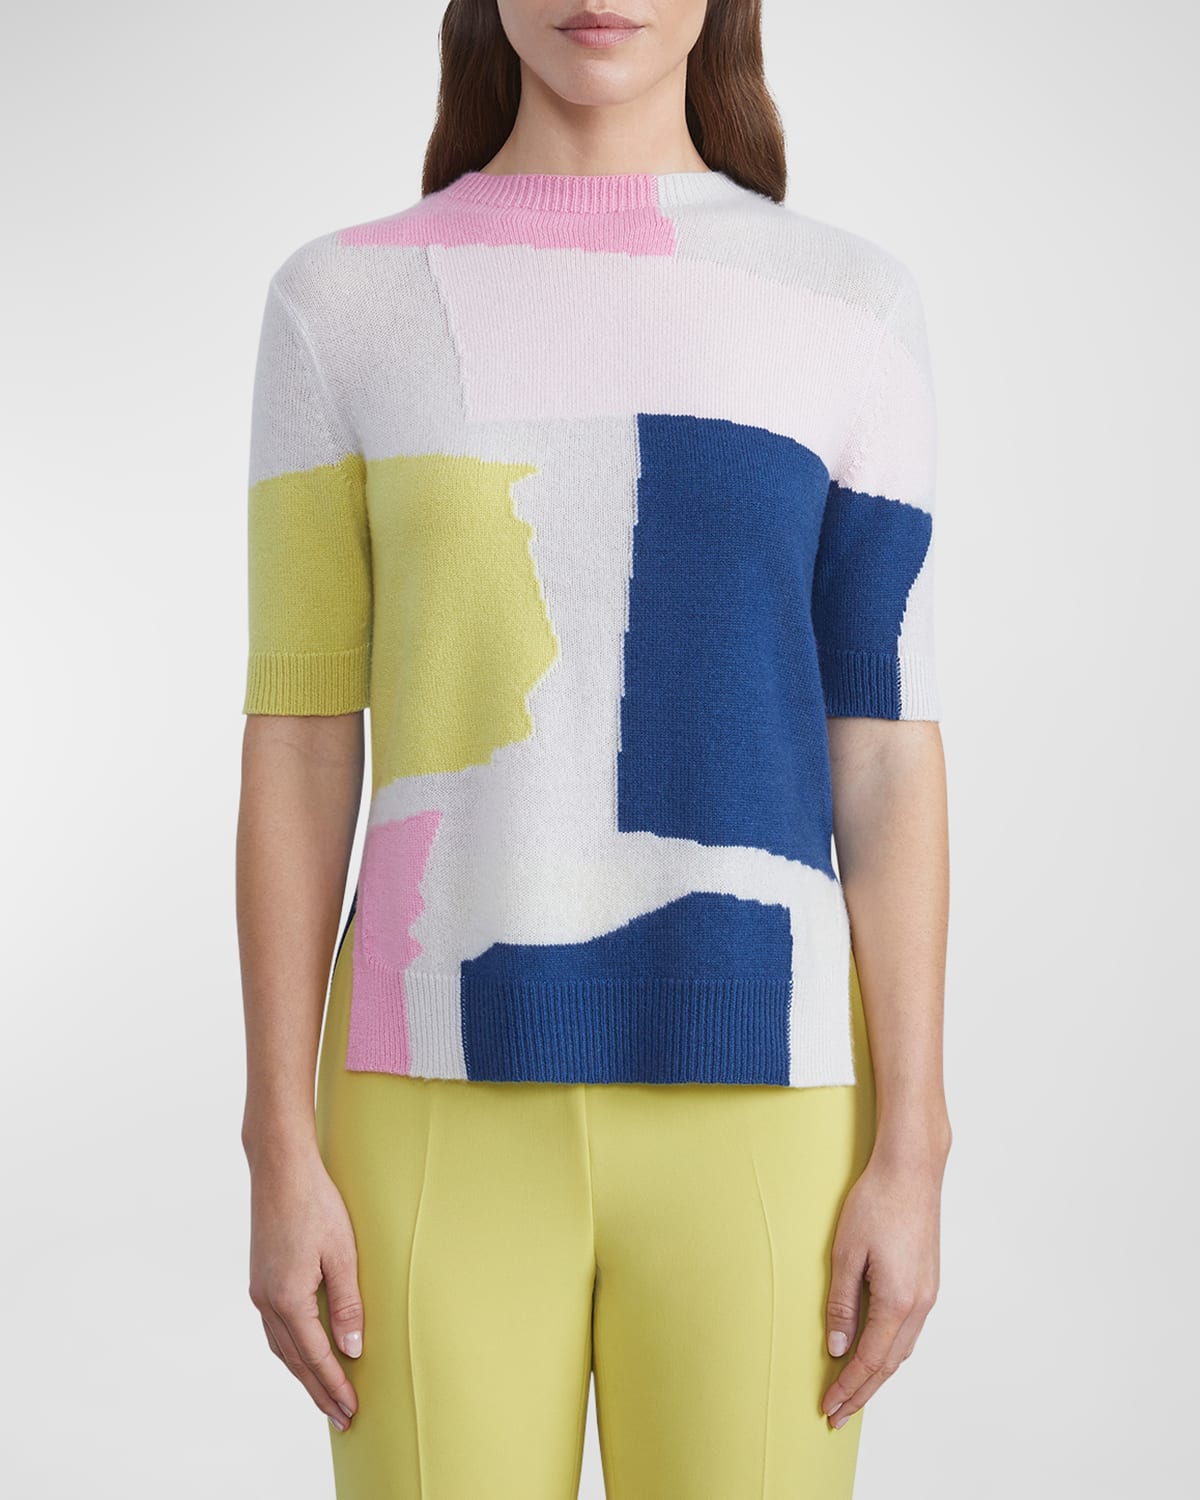 LAFAYETTE 148 PAPER COLLAGE SHORT-SLEEVE INTARSIA SWEATER 